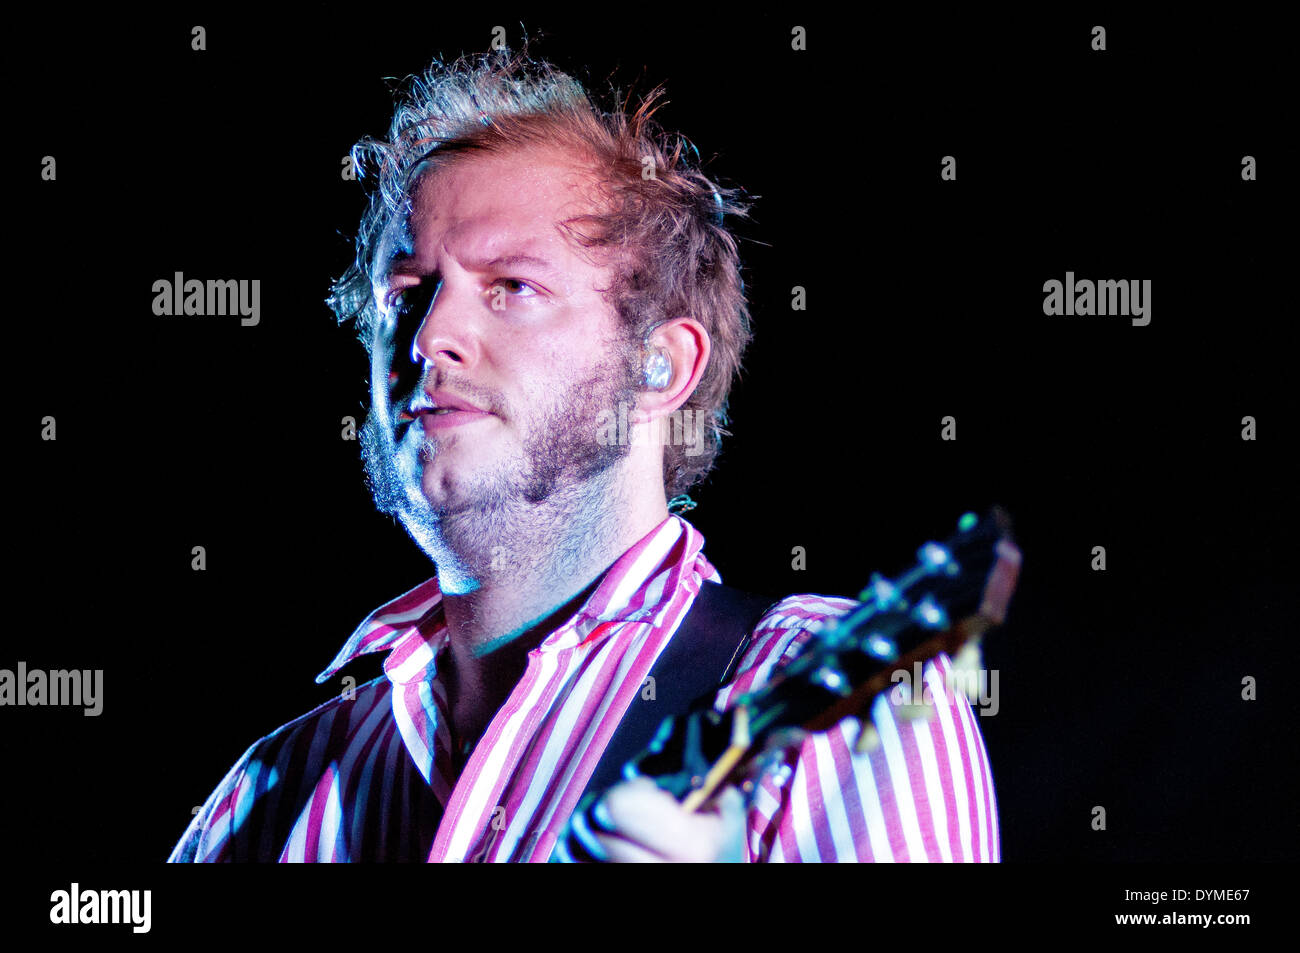 BARCELONA, SPAIN - JULY 27: Justin Vernon, singer of Bon Iver band, performs at Poble Espanyol on July 27, 2012 in Barcelona. Stock Photo